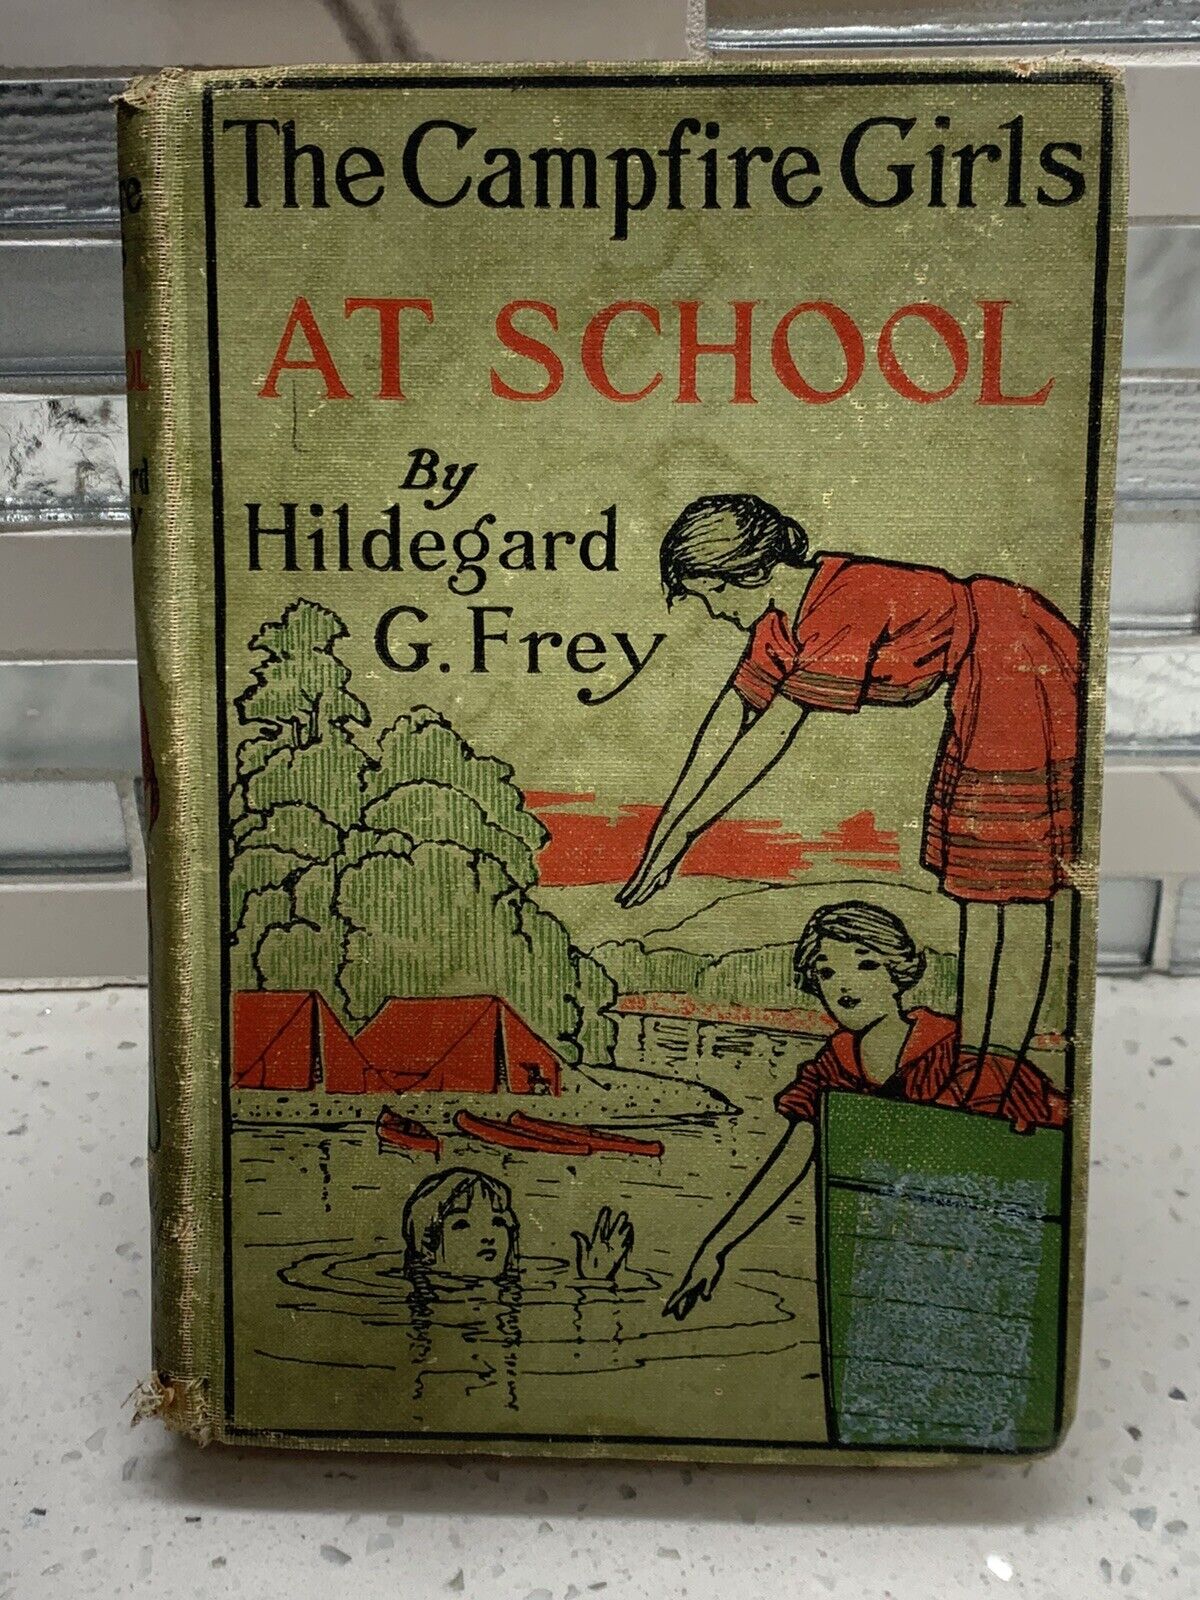 1916 The Campfire Girls At School by Hildegard G. Frey Wood book